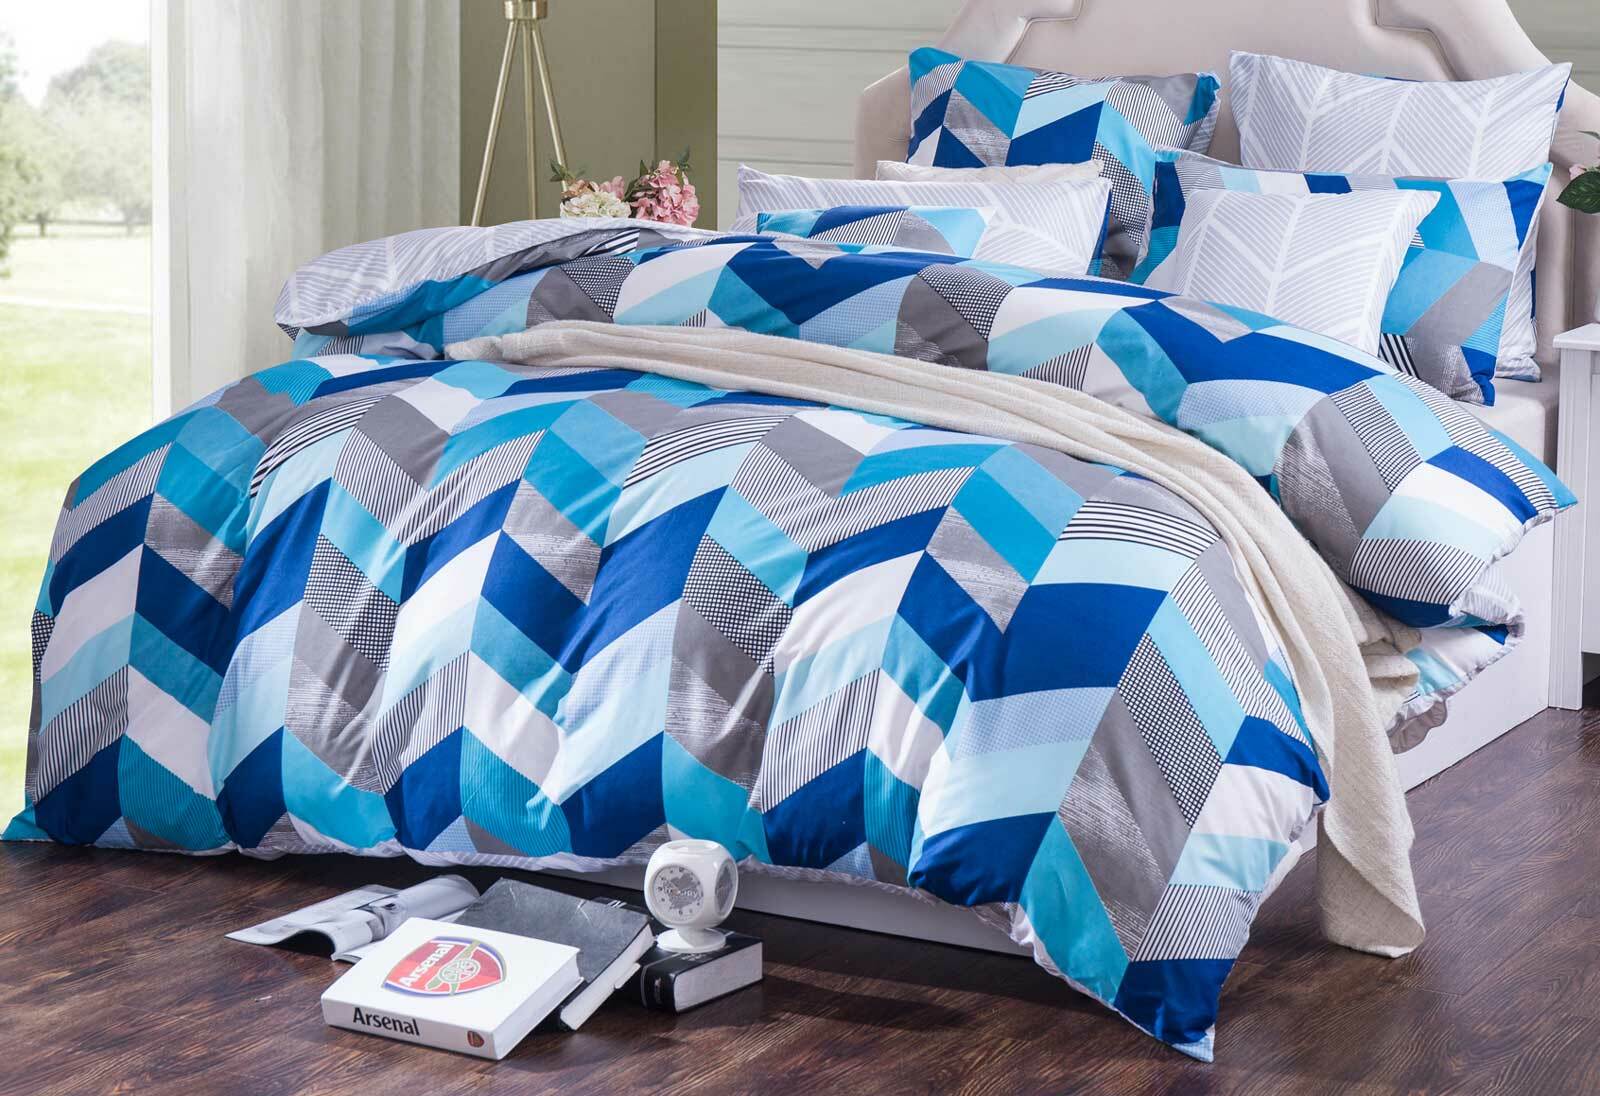 Ricoco Tory Chevron Quilt Cover Set Queen Or King Doona Cover Set